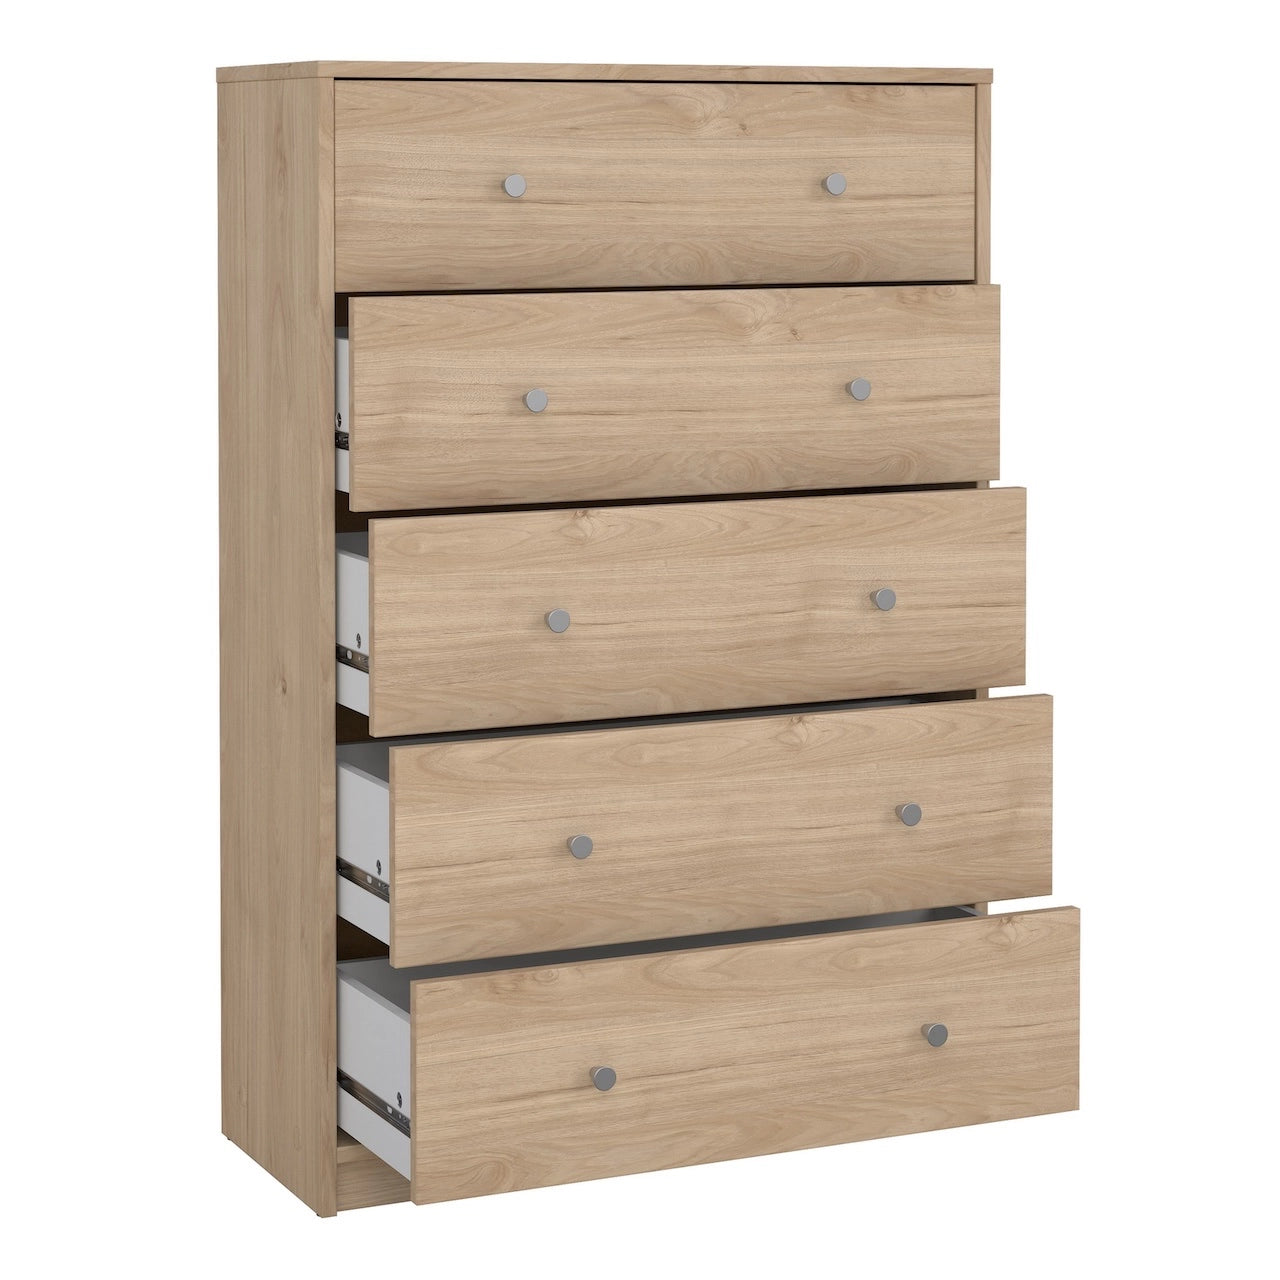 Furniture To Go May Chest of 5 Drawers in Jackson Hickory Oak